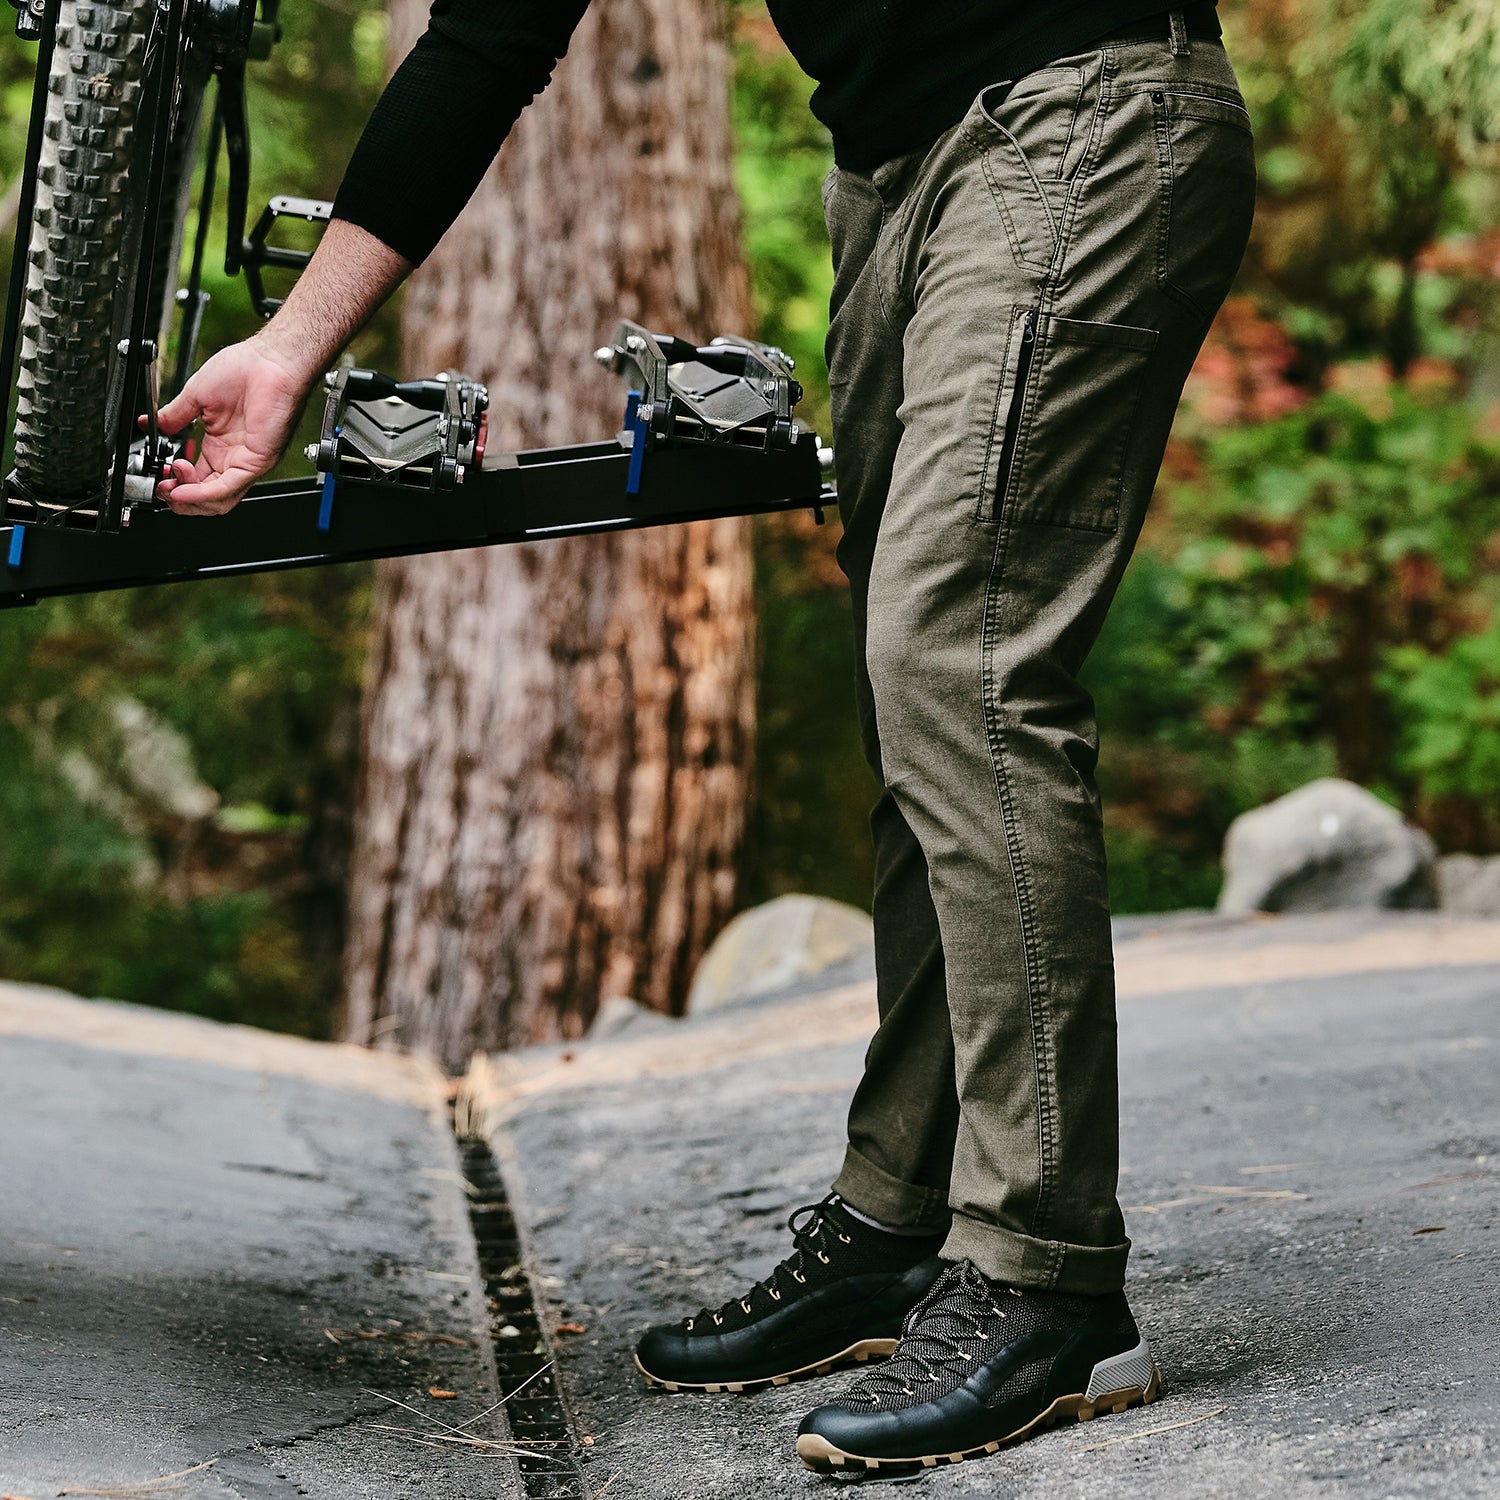 Our All-Time Favorite Pair of Adventure Pants Just Got Even Better